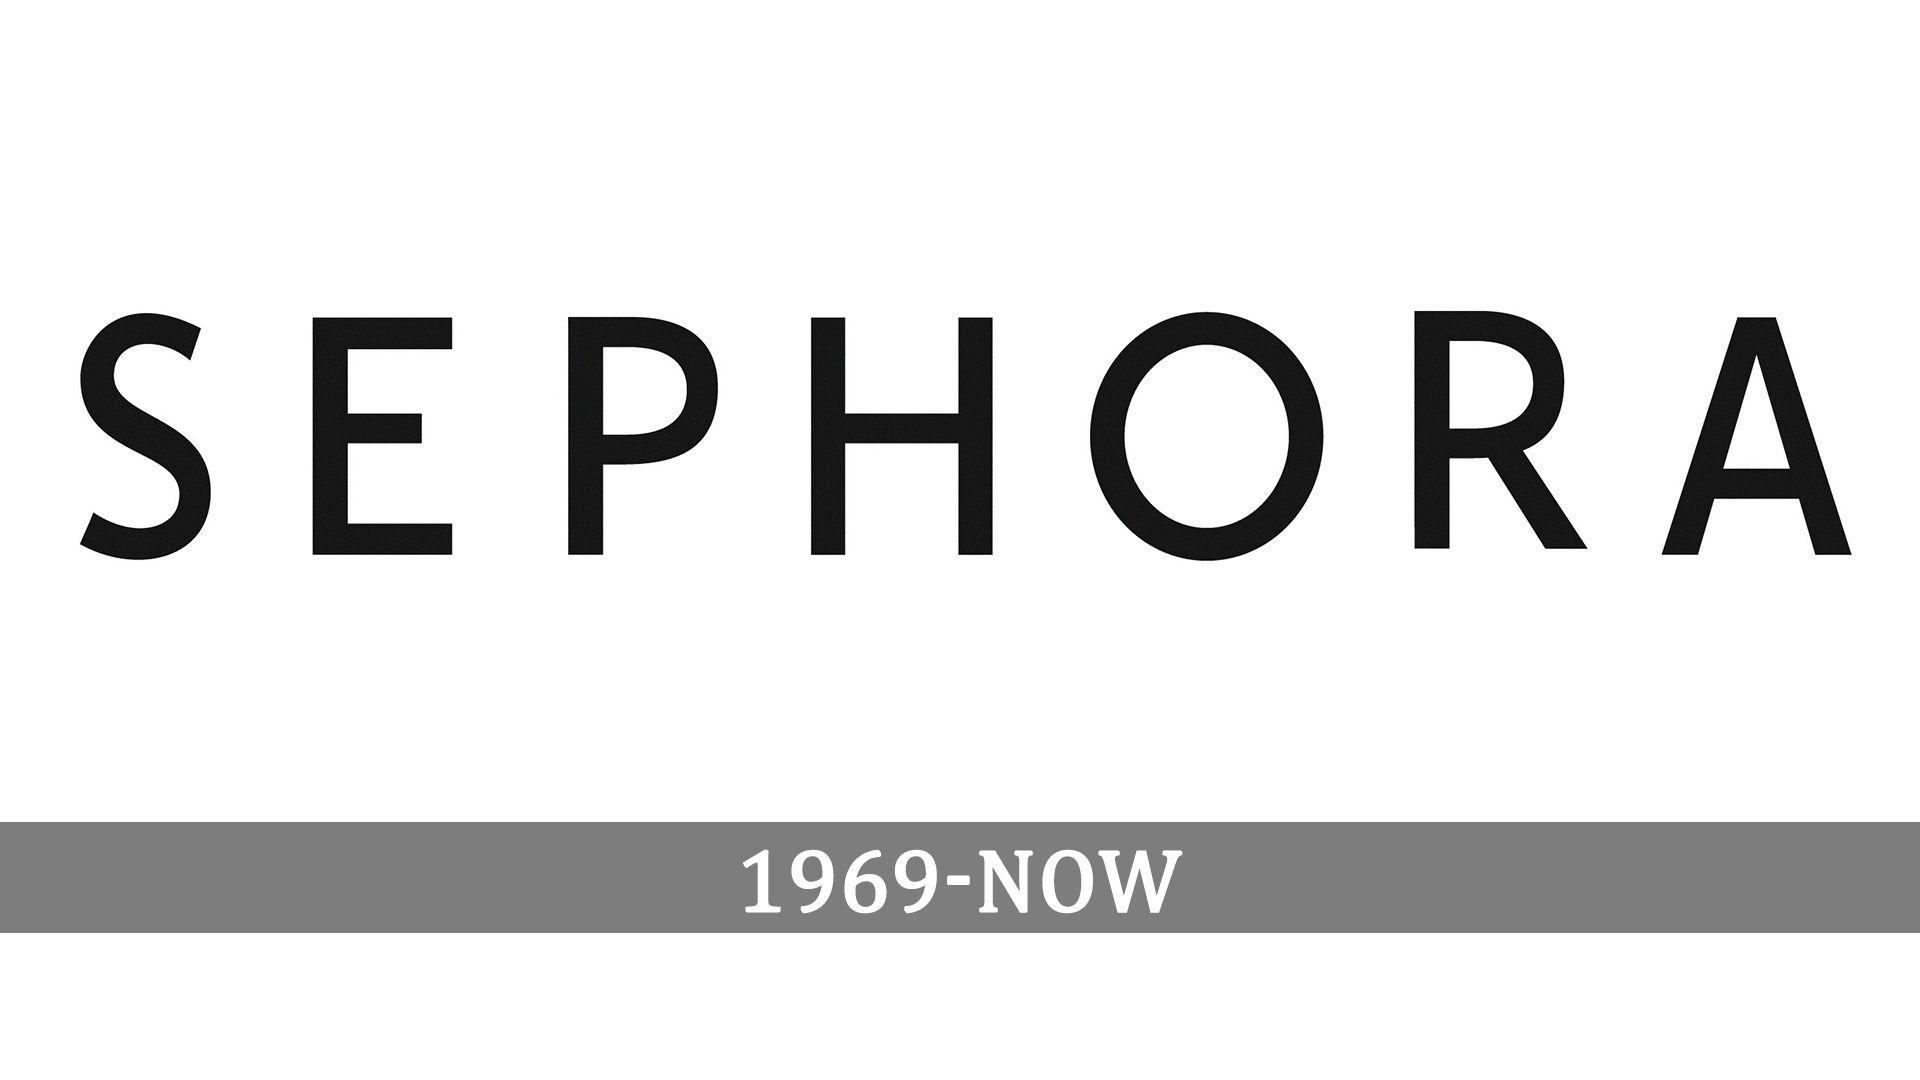 Sephora Logo - Sephora logo, Sephora Symbol, Meaning, History and Evolution